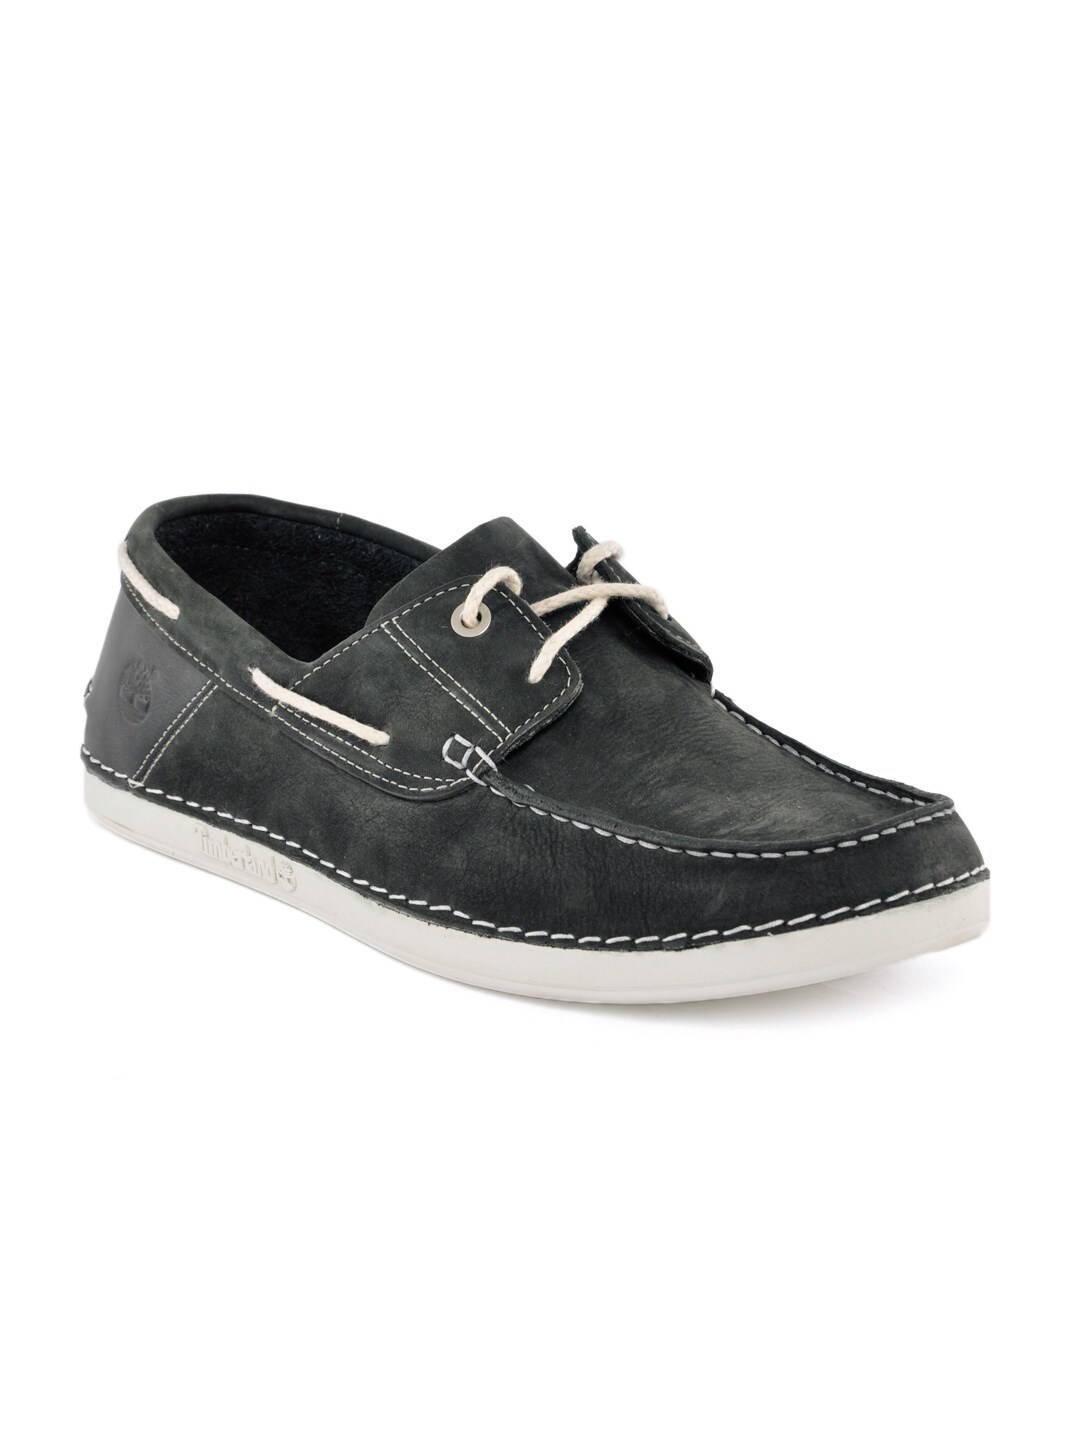 Timberland Men Navy Blue Casual Shoes